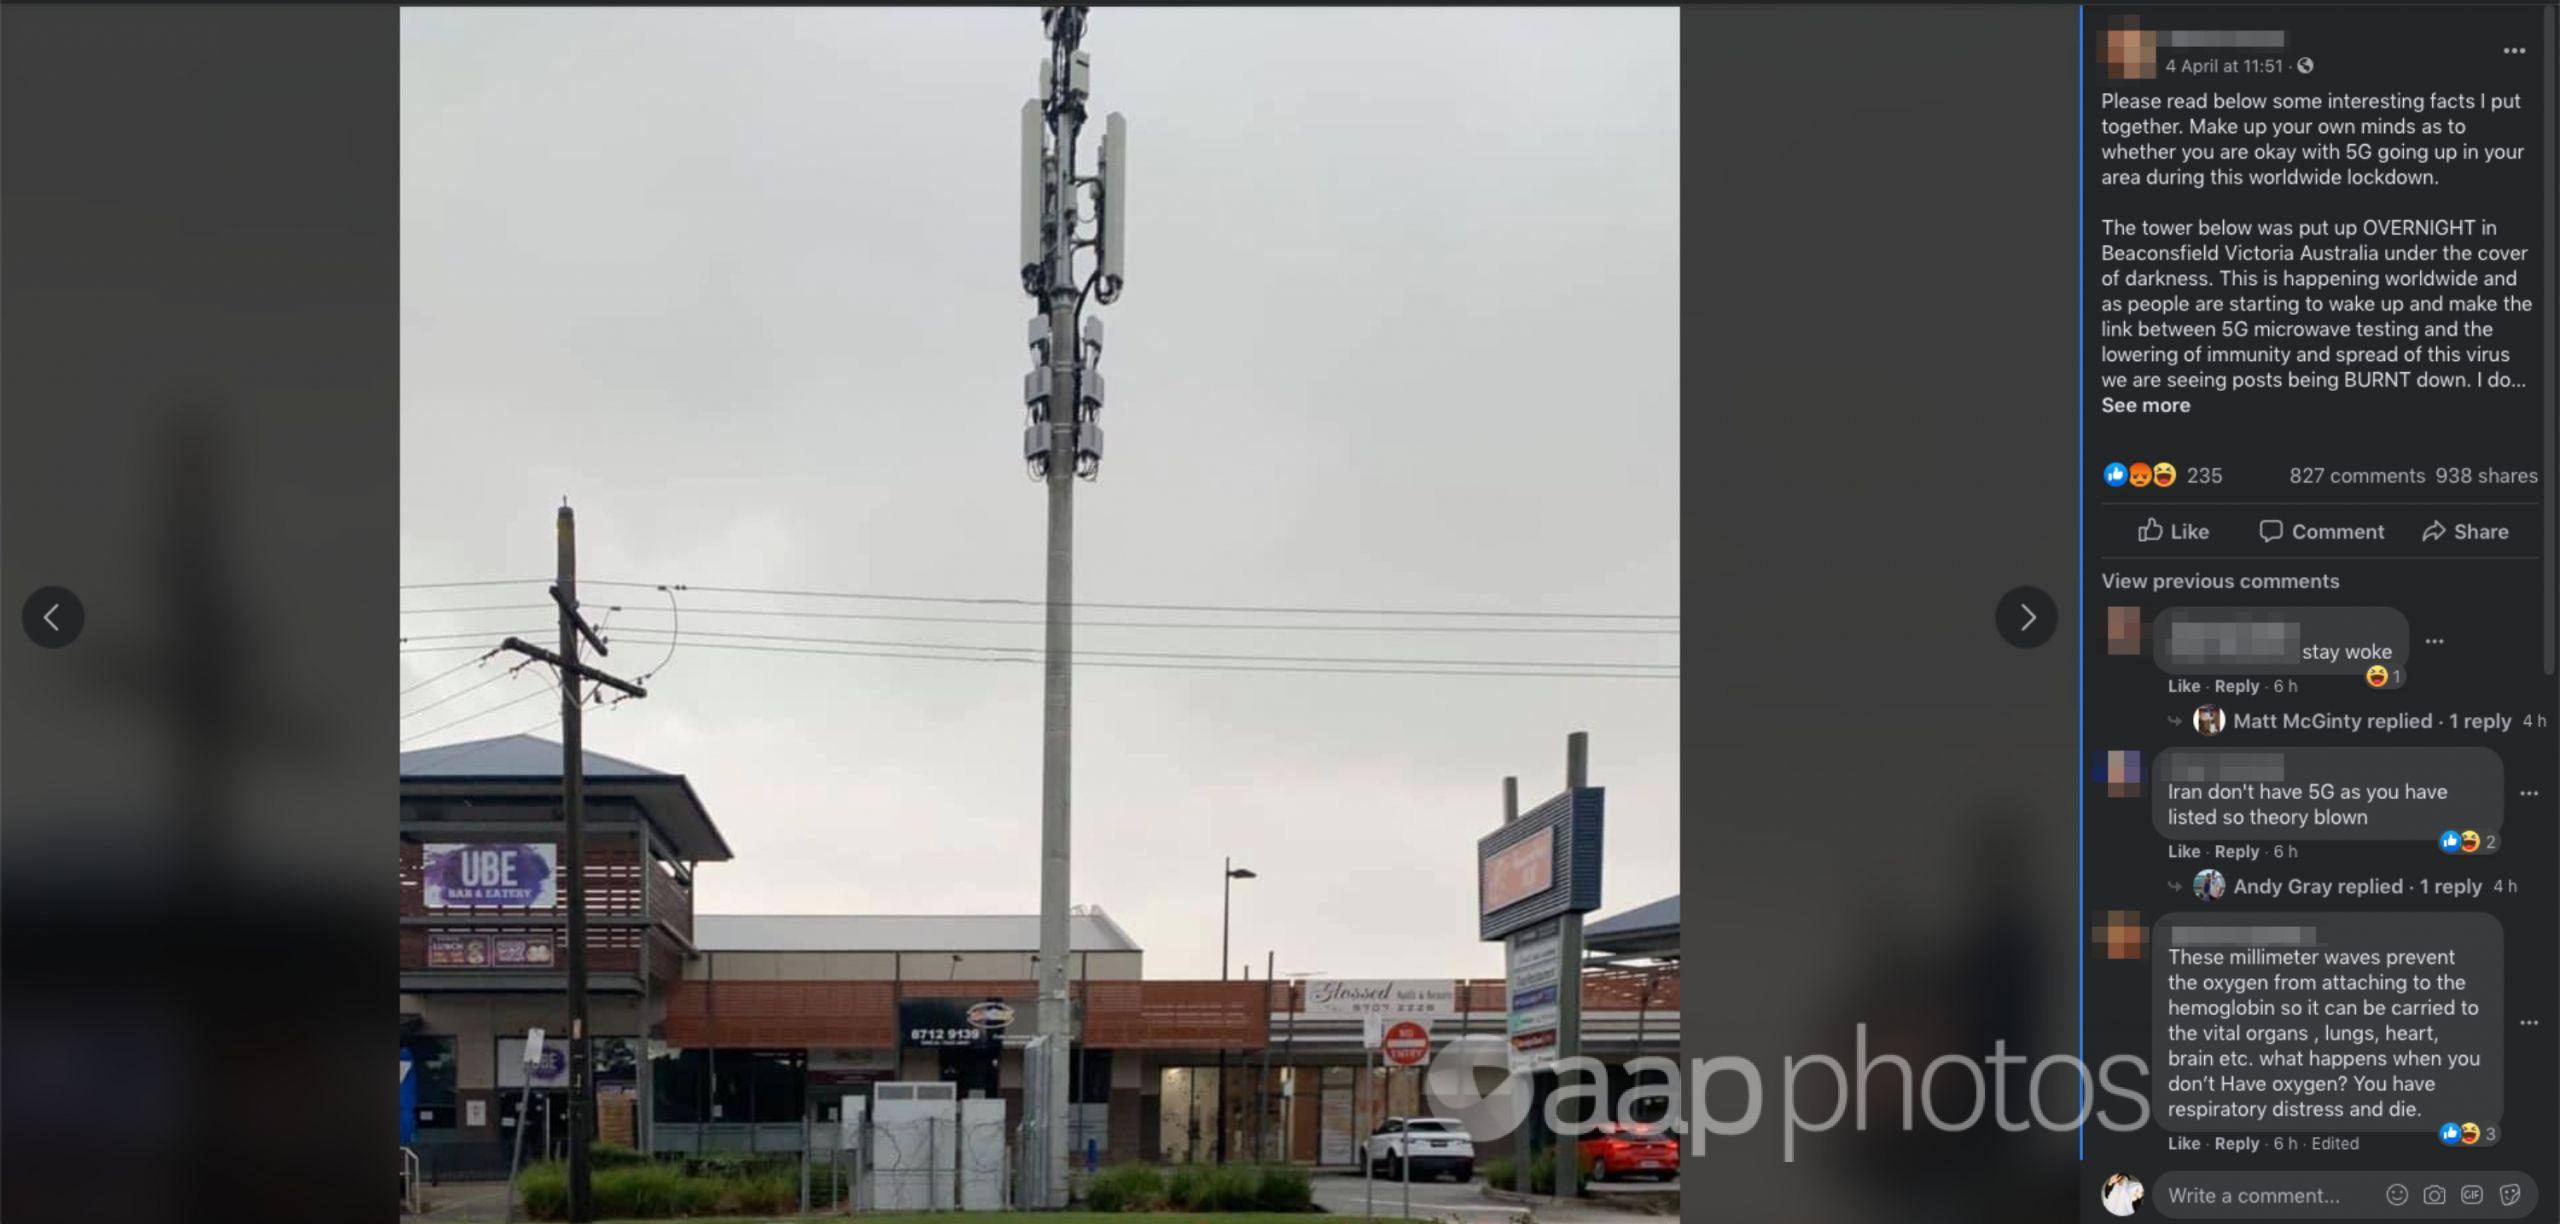 An FB user claims a 5G tower was erected in Beaconsfield, Victoria.